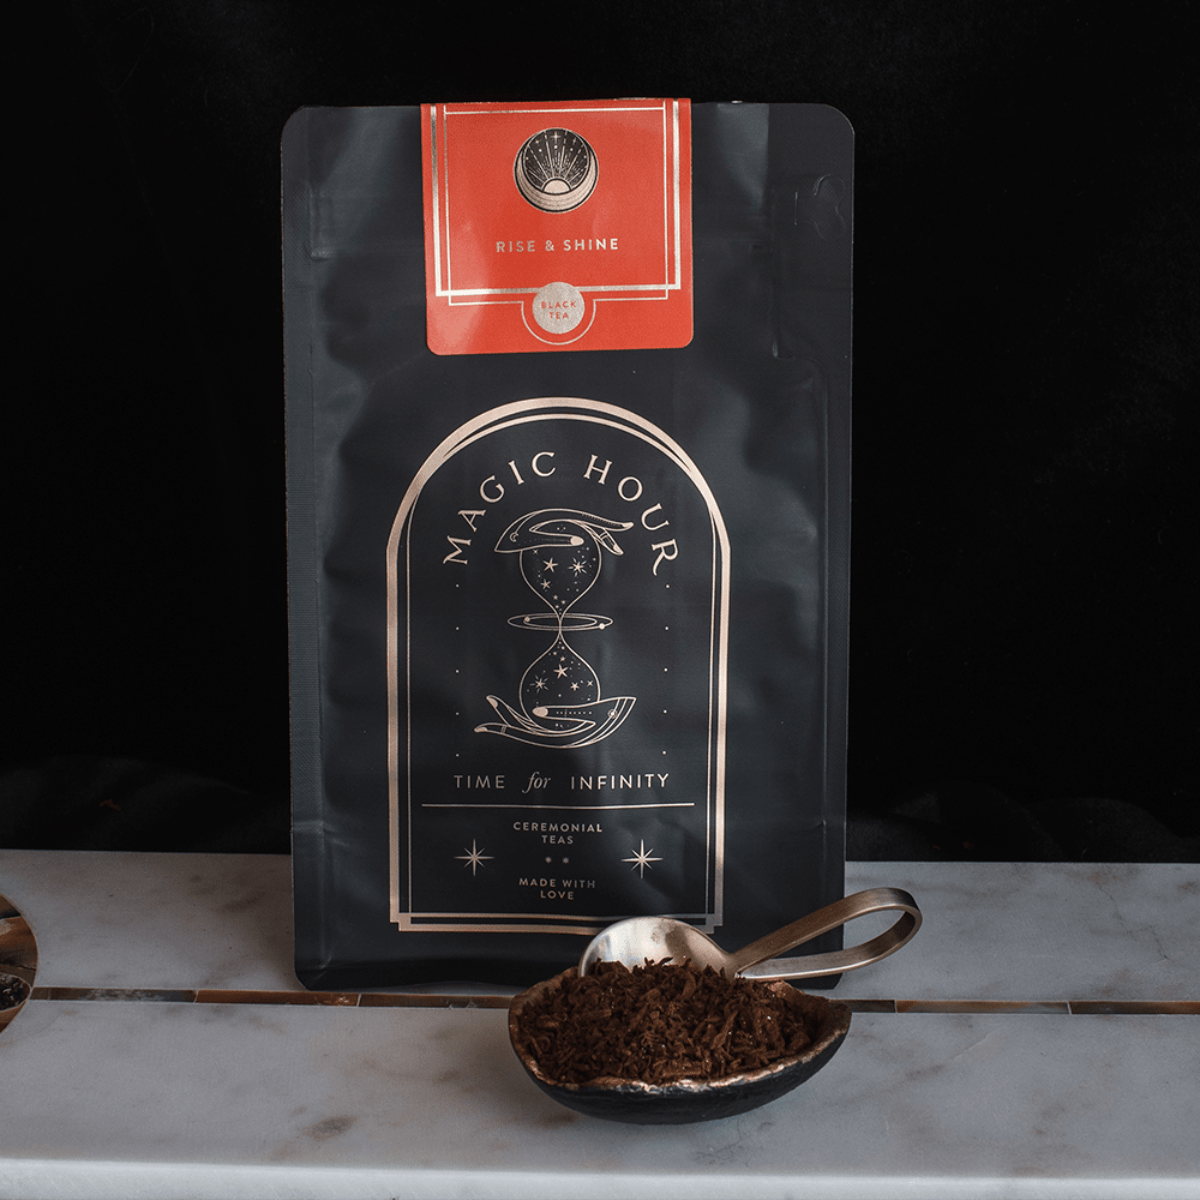 A black, resealable bag labeled "Rise & Shine Black Tea" with a celestial design and the phrase "Time for Infinity" is displayed upright. A red label at the top says "Club Magic Hour." In front, a spoon rests in a small bowl filled with organic loose leaf tea.